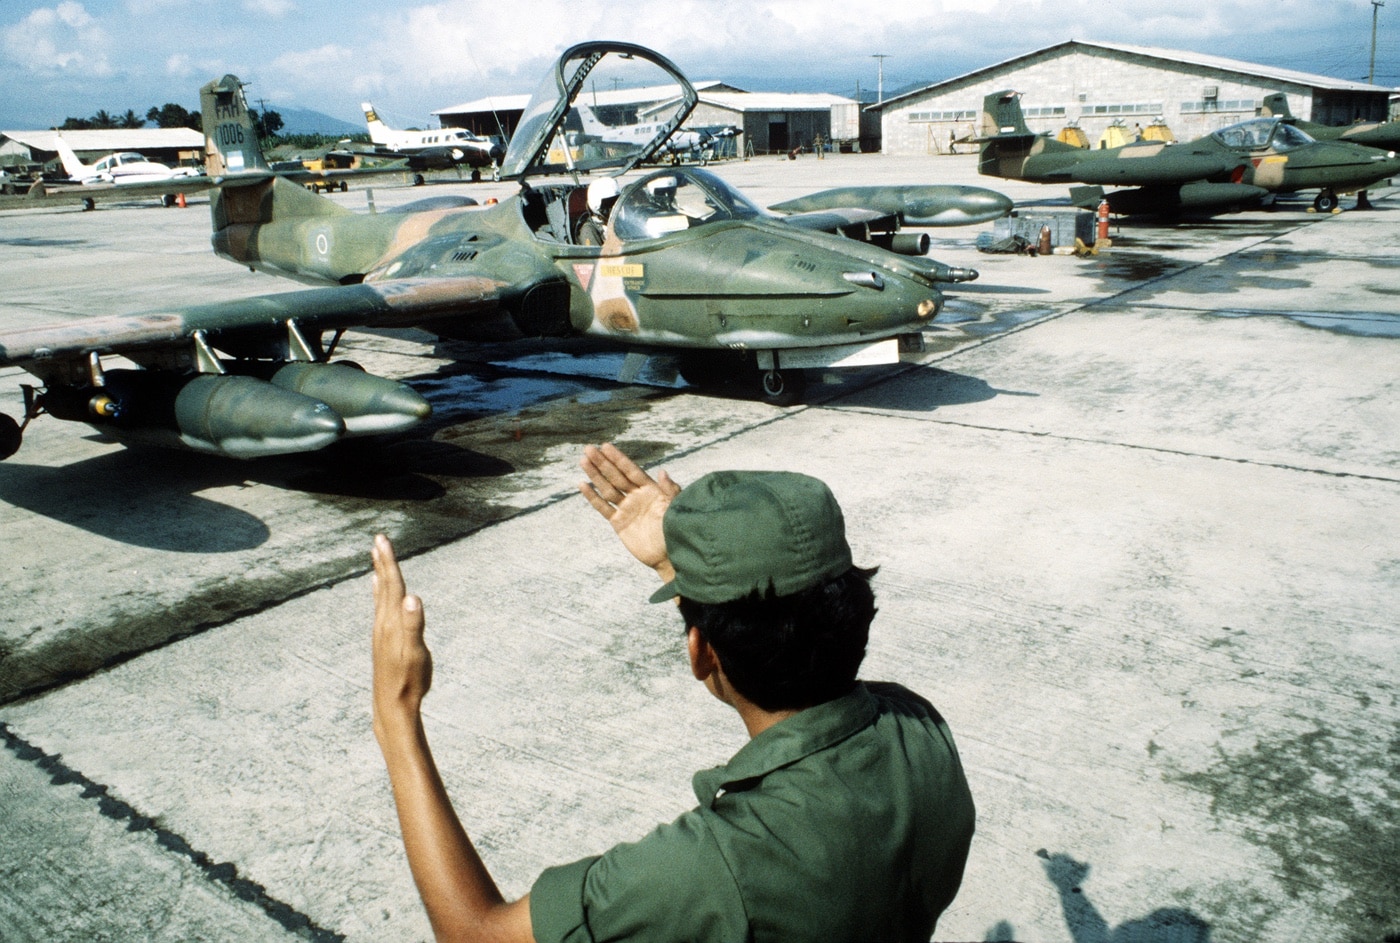 In this last photograph, we see an A-37 operated by the Honduran Air Force. The Honduras Air Force is the air force of Honduras. As such it is the air power arm of the Honduras Armed Forces. The Armed Forces of Honduras, consists of the Honduran Army, Honduran Navy and Honduran Air Force.